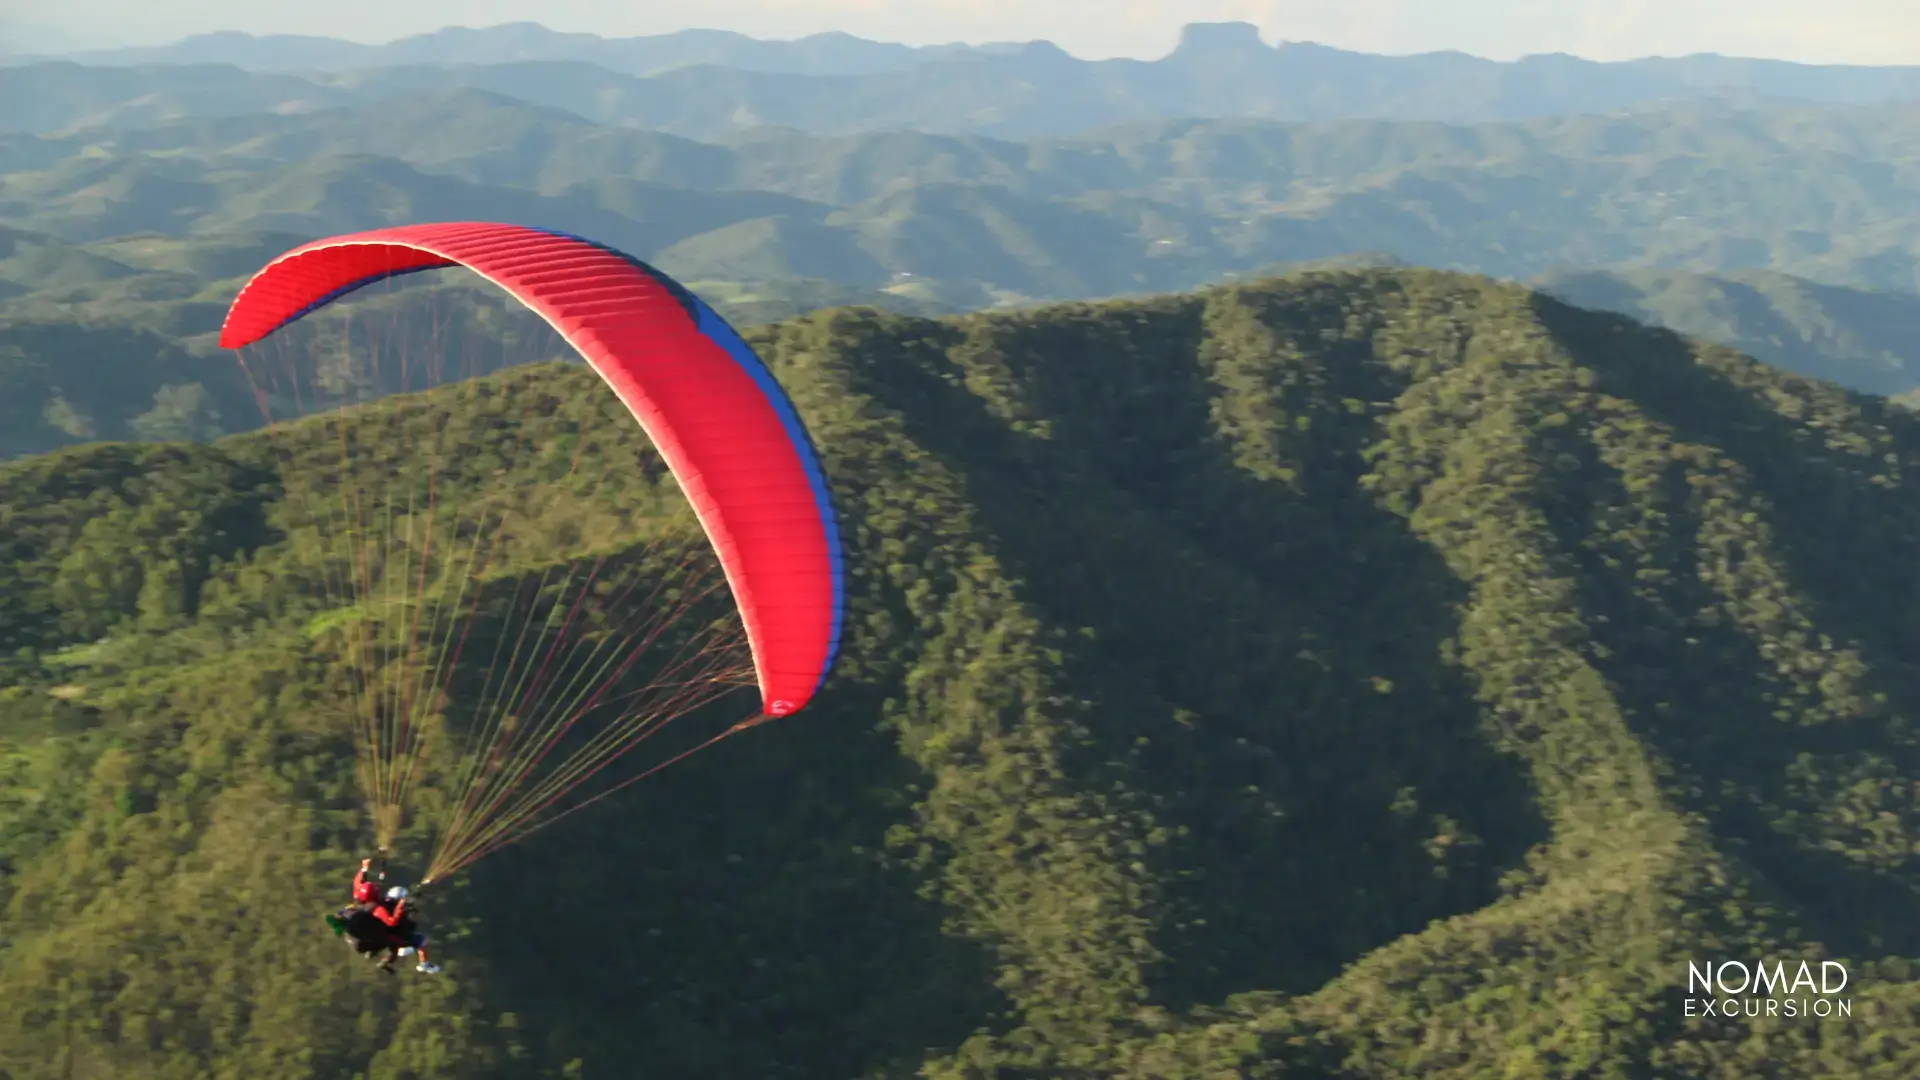 Paragliding: Soar Above the Mountains